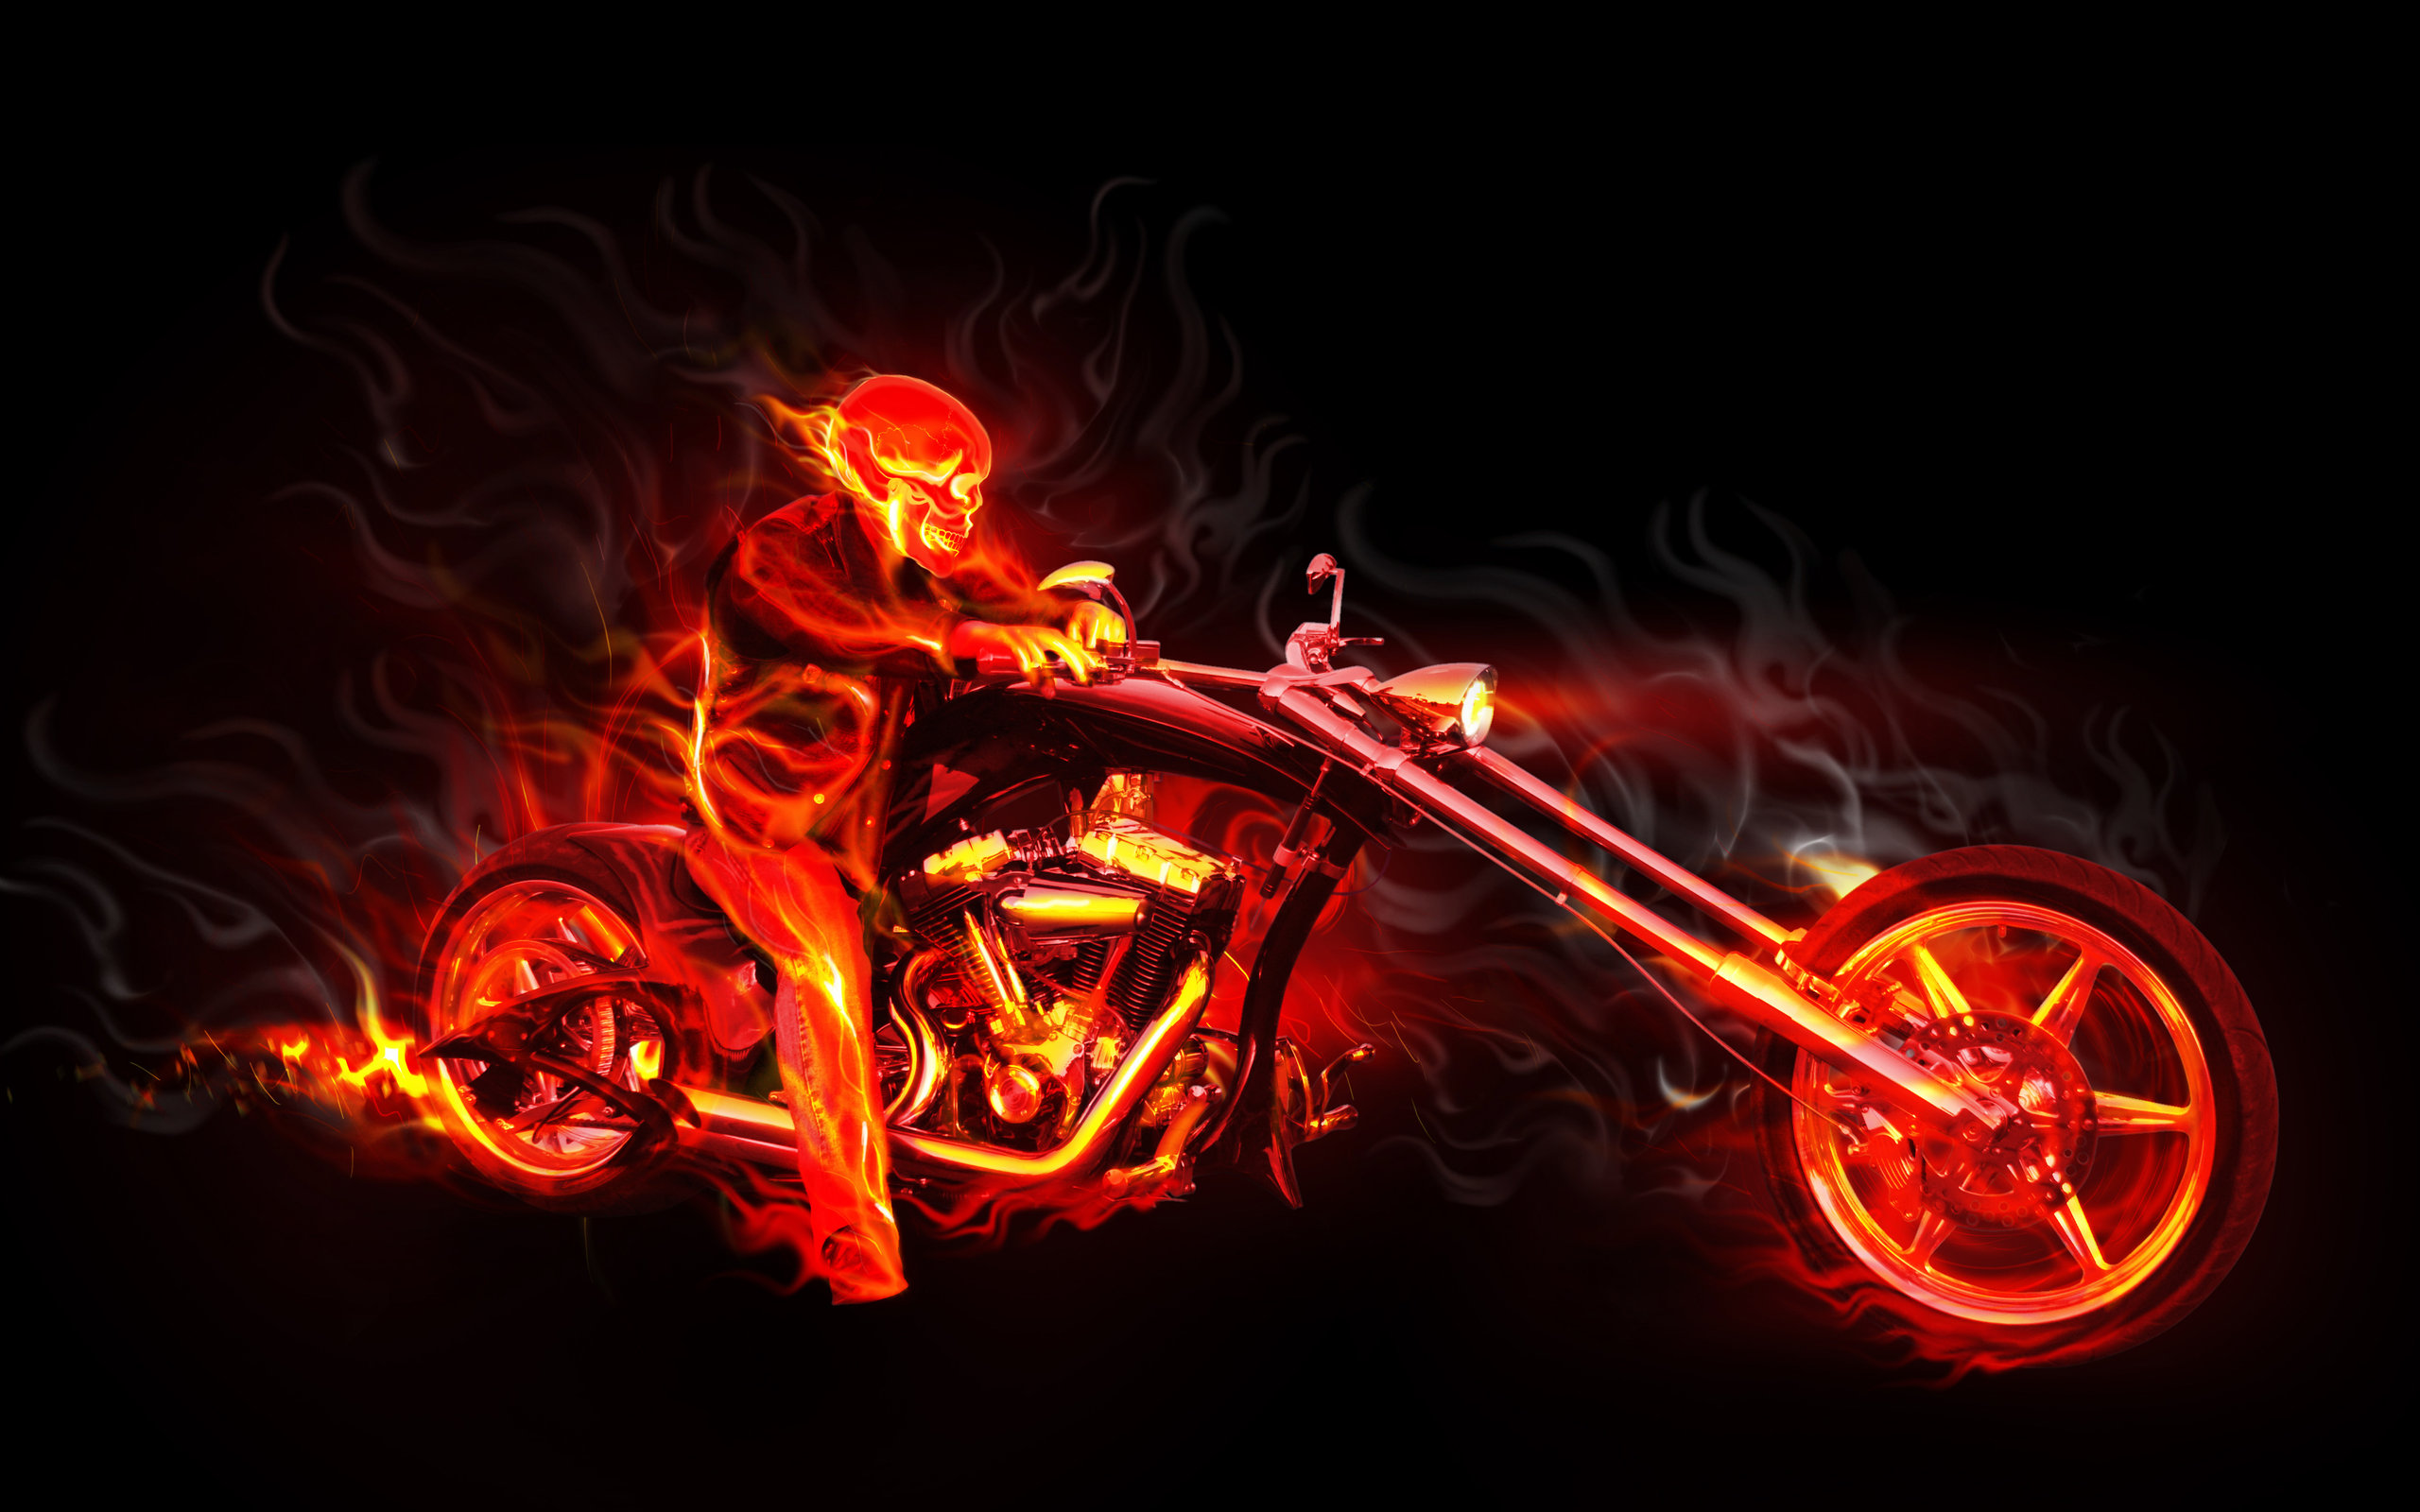 Fire Wallpapers HD | Wallpapers, Backgrounds, Images, Art Photos.